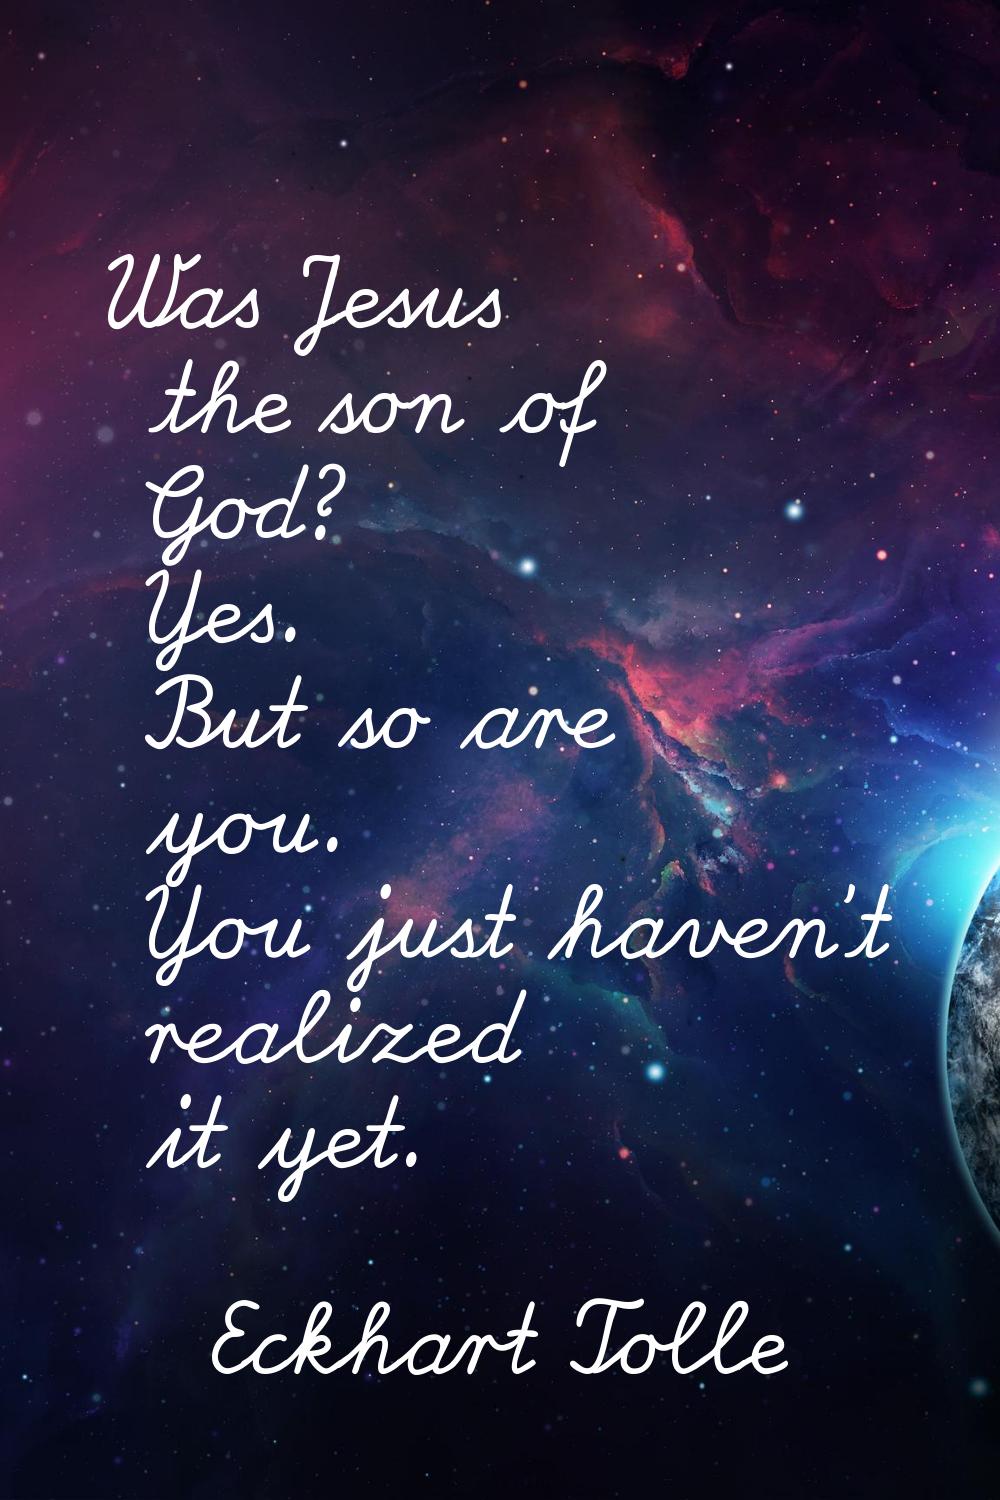 Was Jesus the son of God? Yes. But so are you. You just haven't realized it yet.